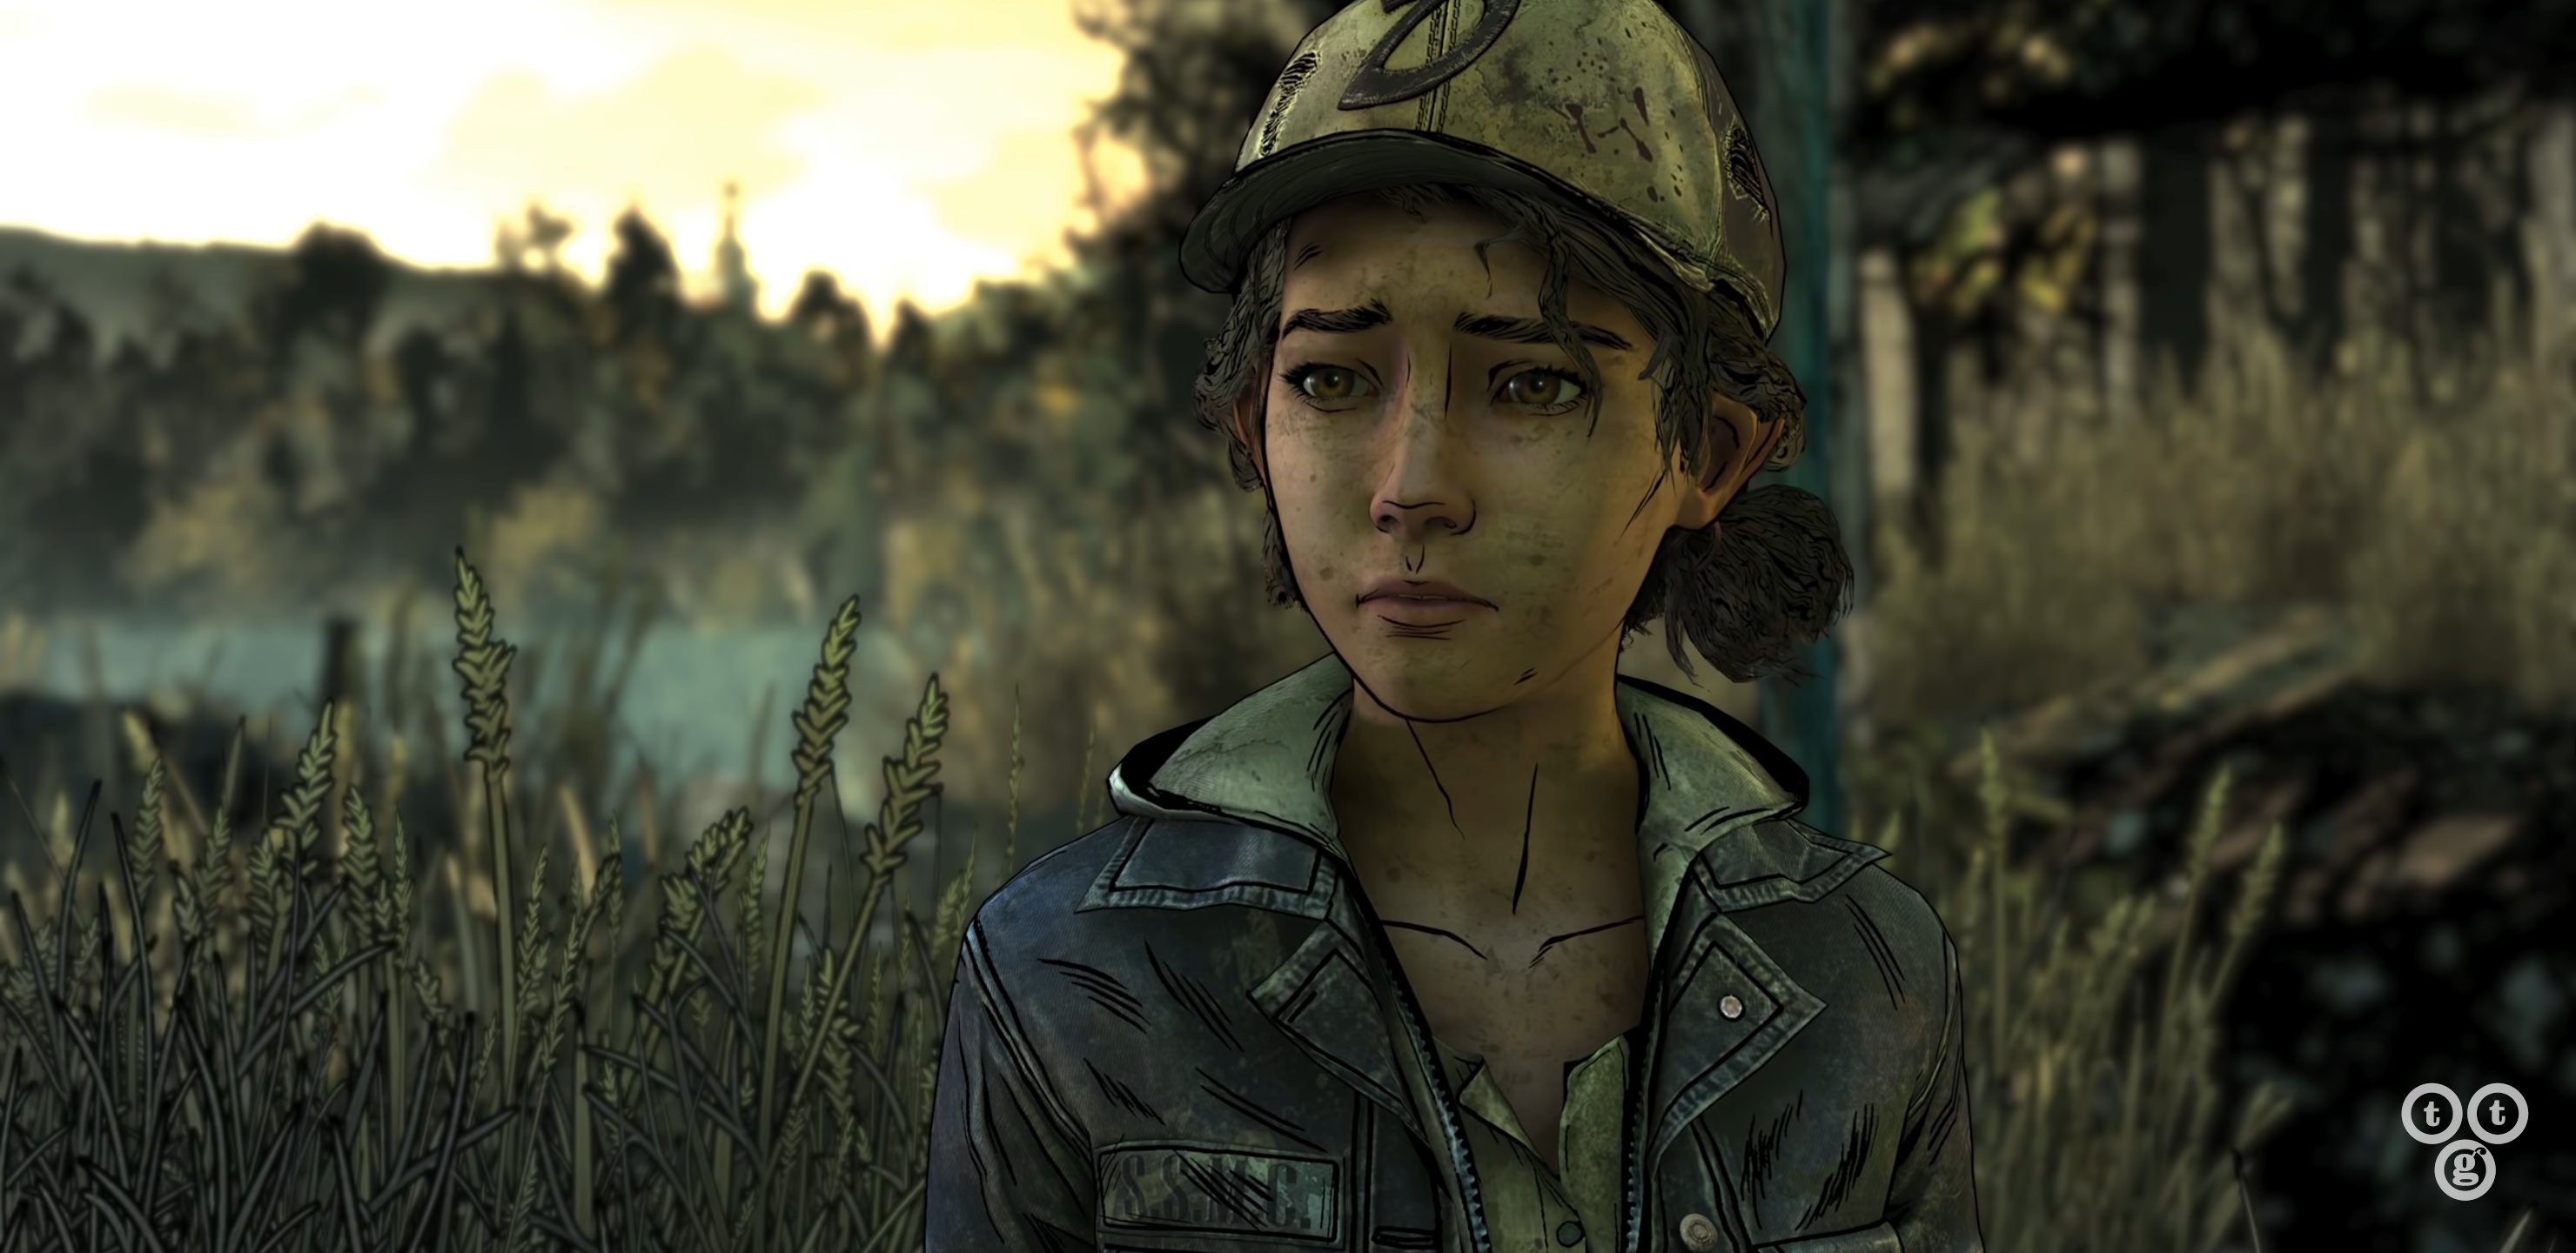 Load 20 More Imagesgrid View - Twdg S4 Clementine , HD Wallpaper & Backgrounds